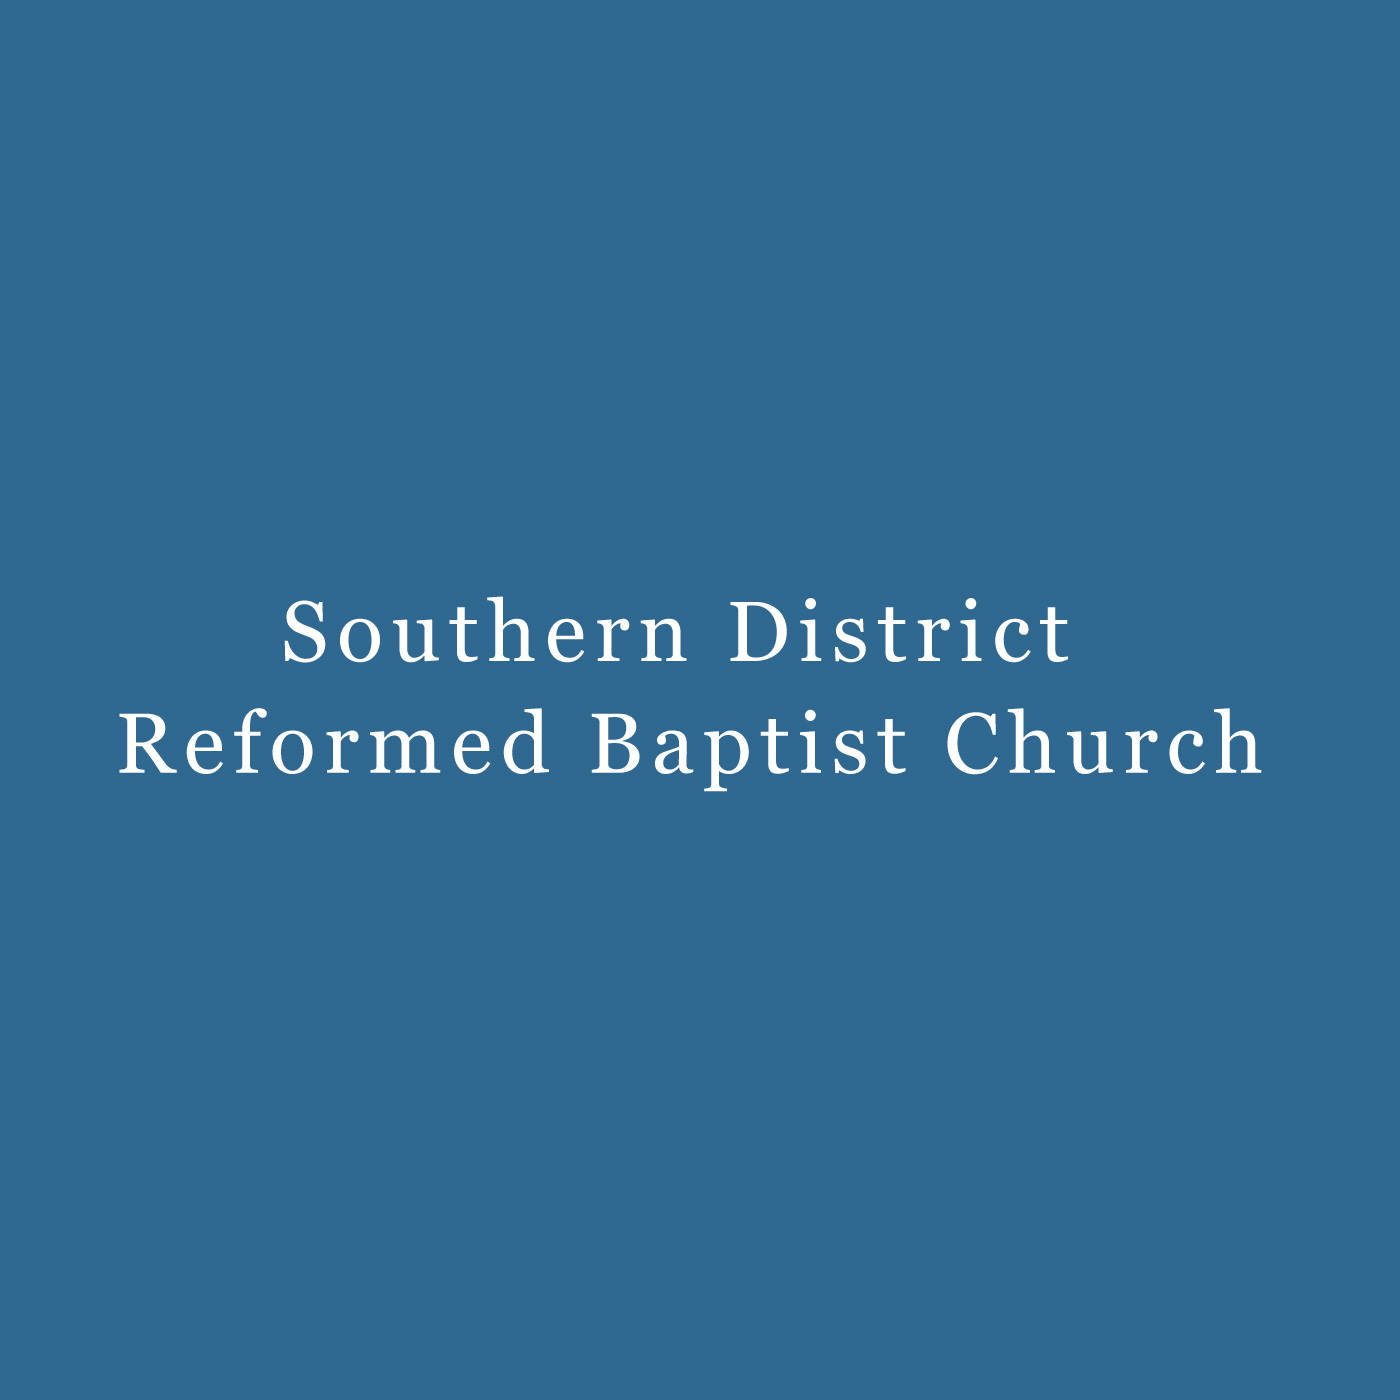 Southern District Reformed Baptist Church